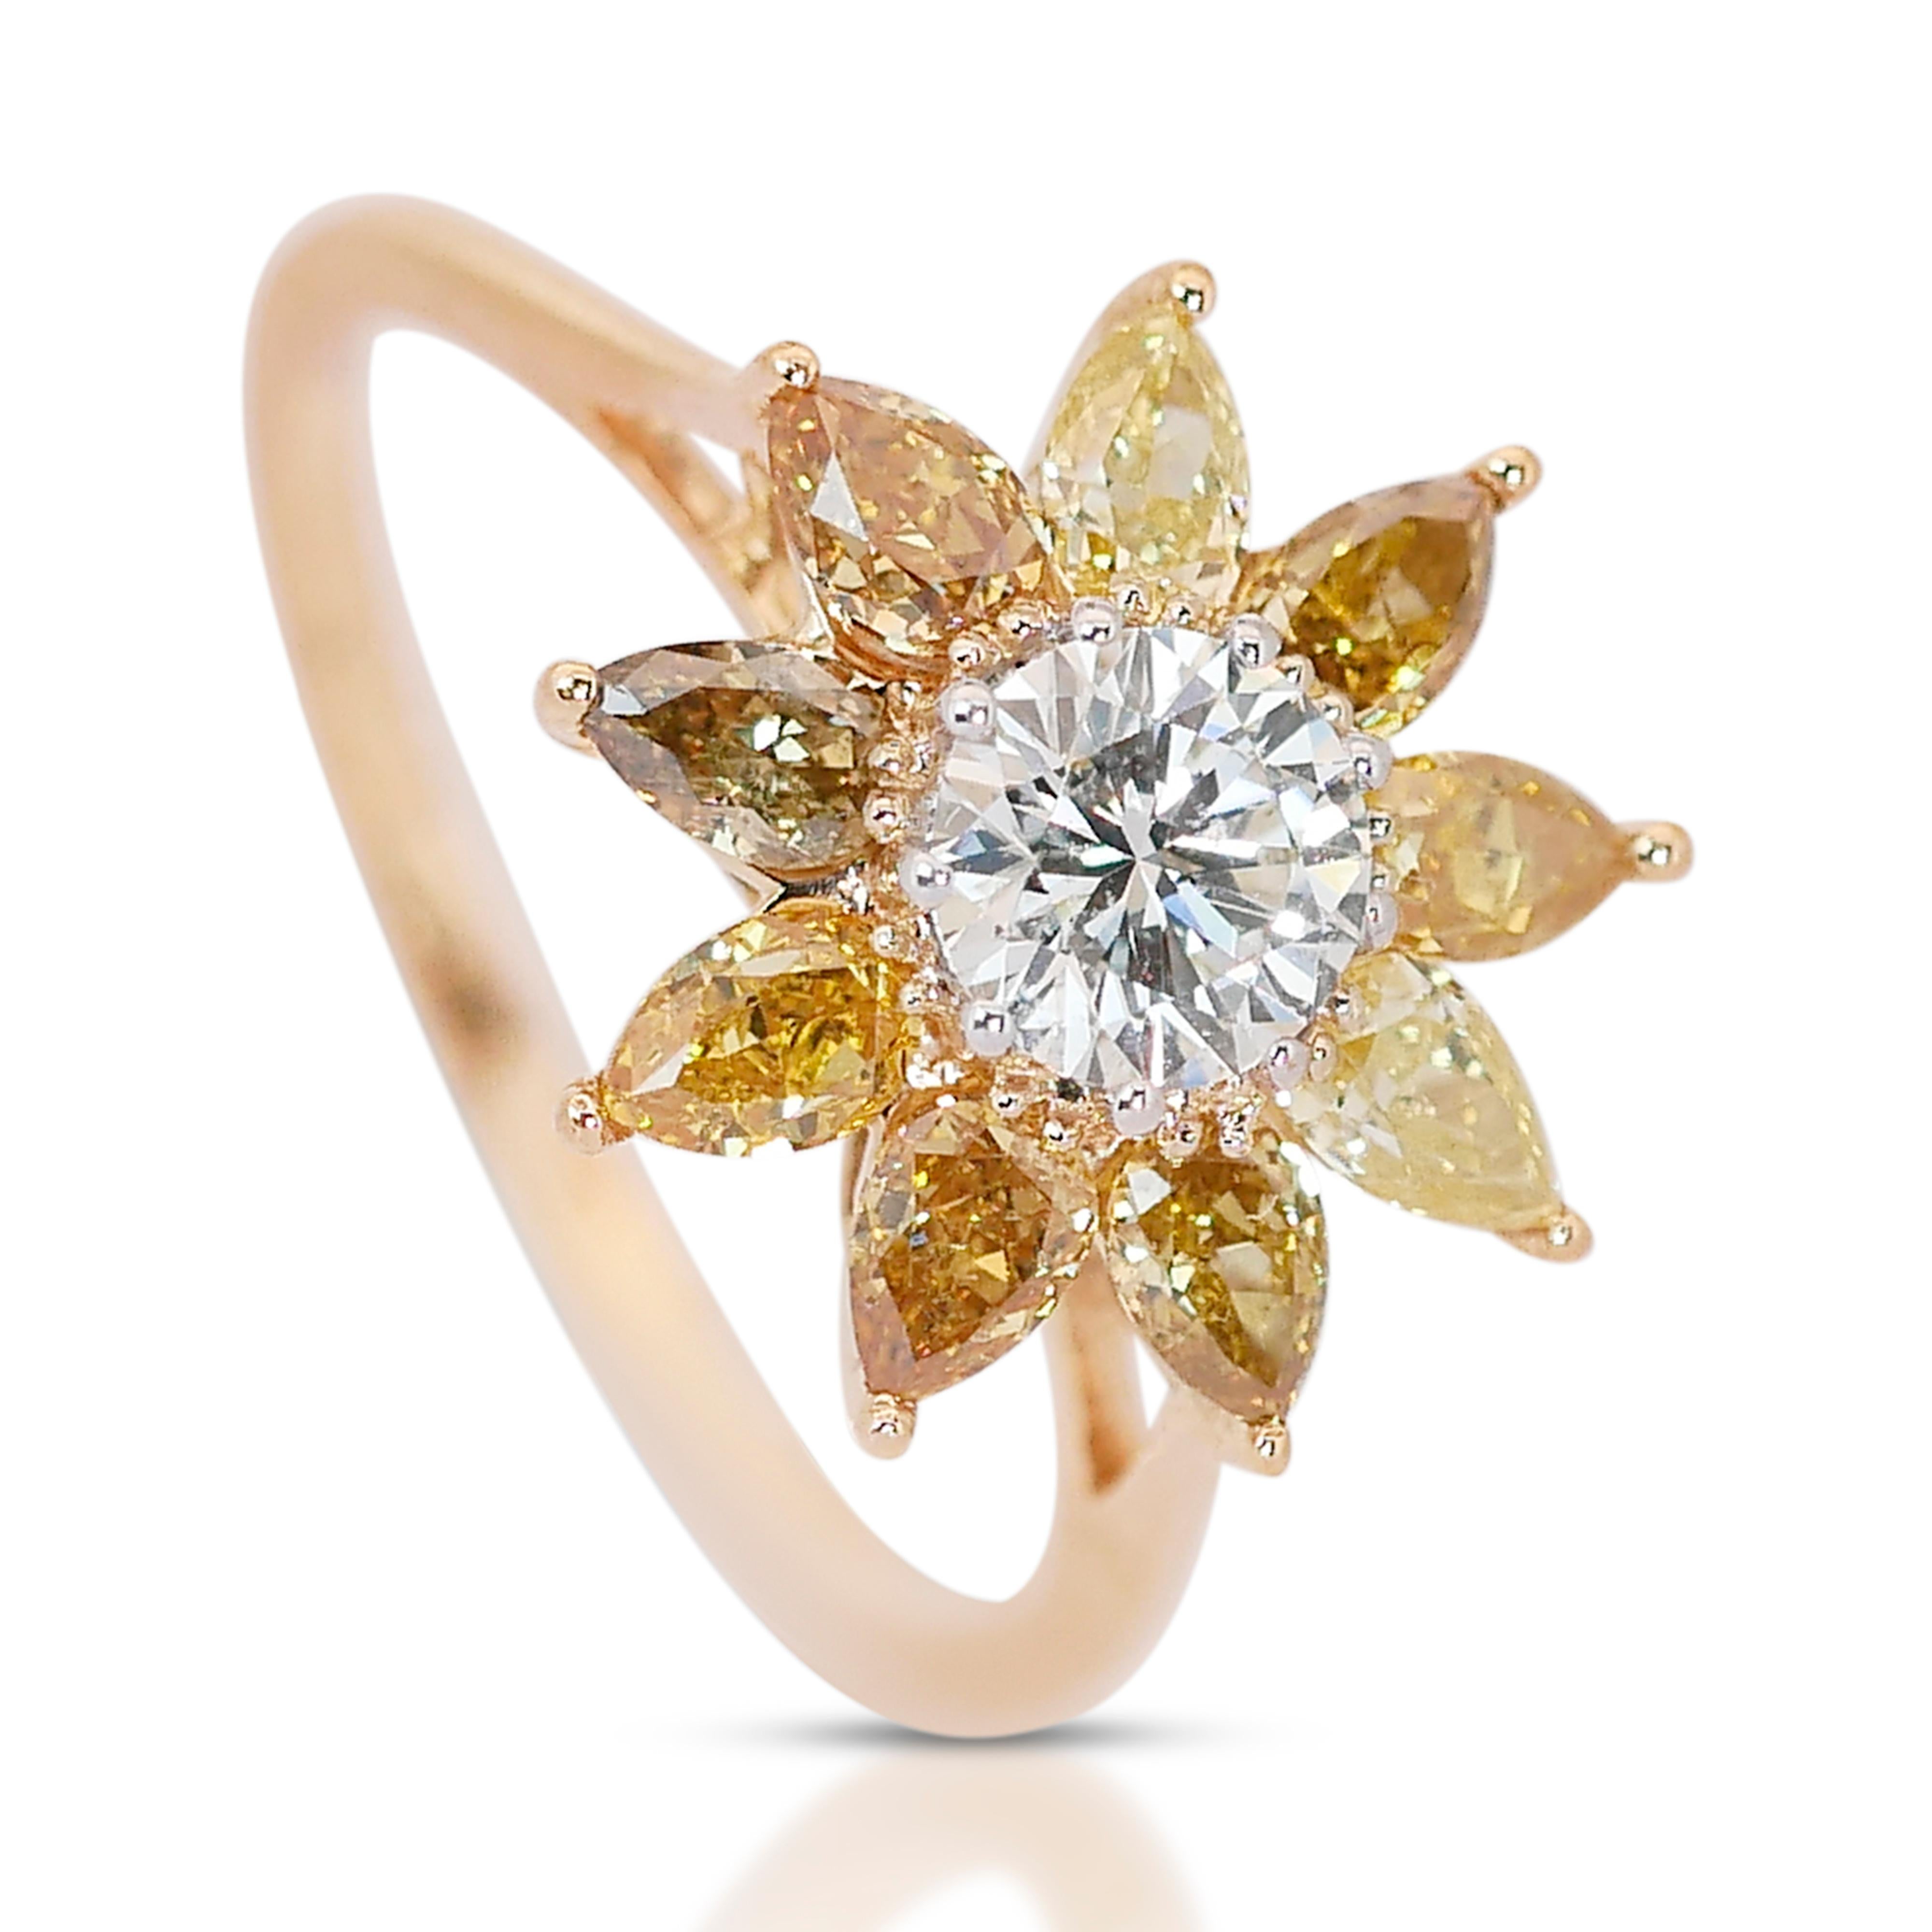 Vibrant  and one-of-a-kind 1.85 ct Fancy Colored Diamond Ring in 18k Yellow Gold For Sale 3